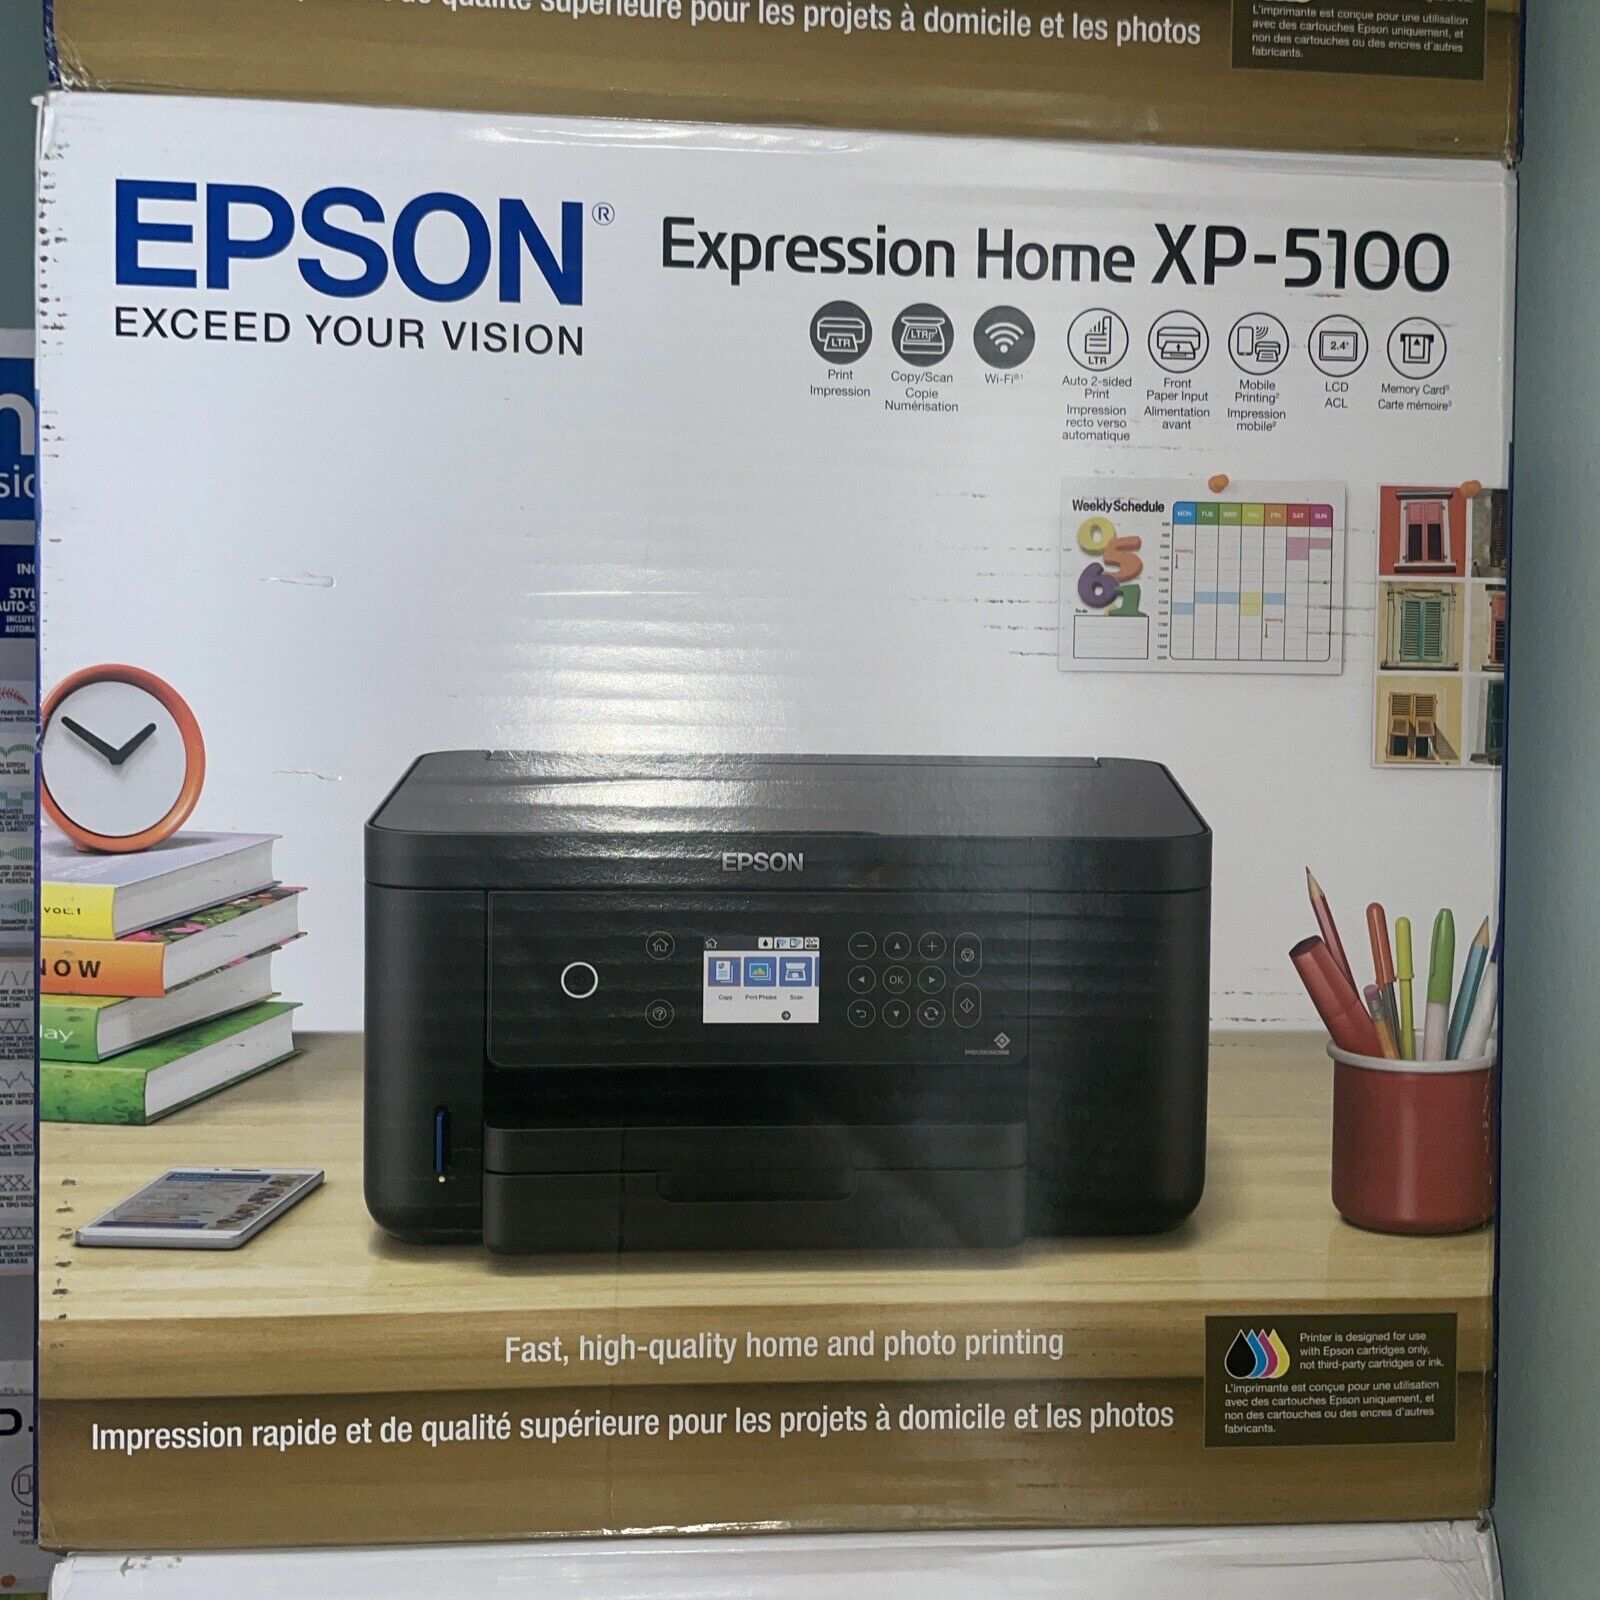 Epson Expression Home XP-5100 Wireless All-In-One Printer - Black